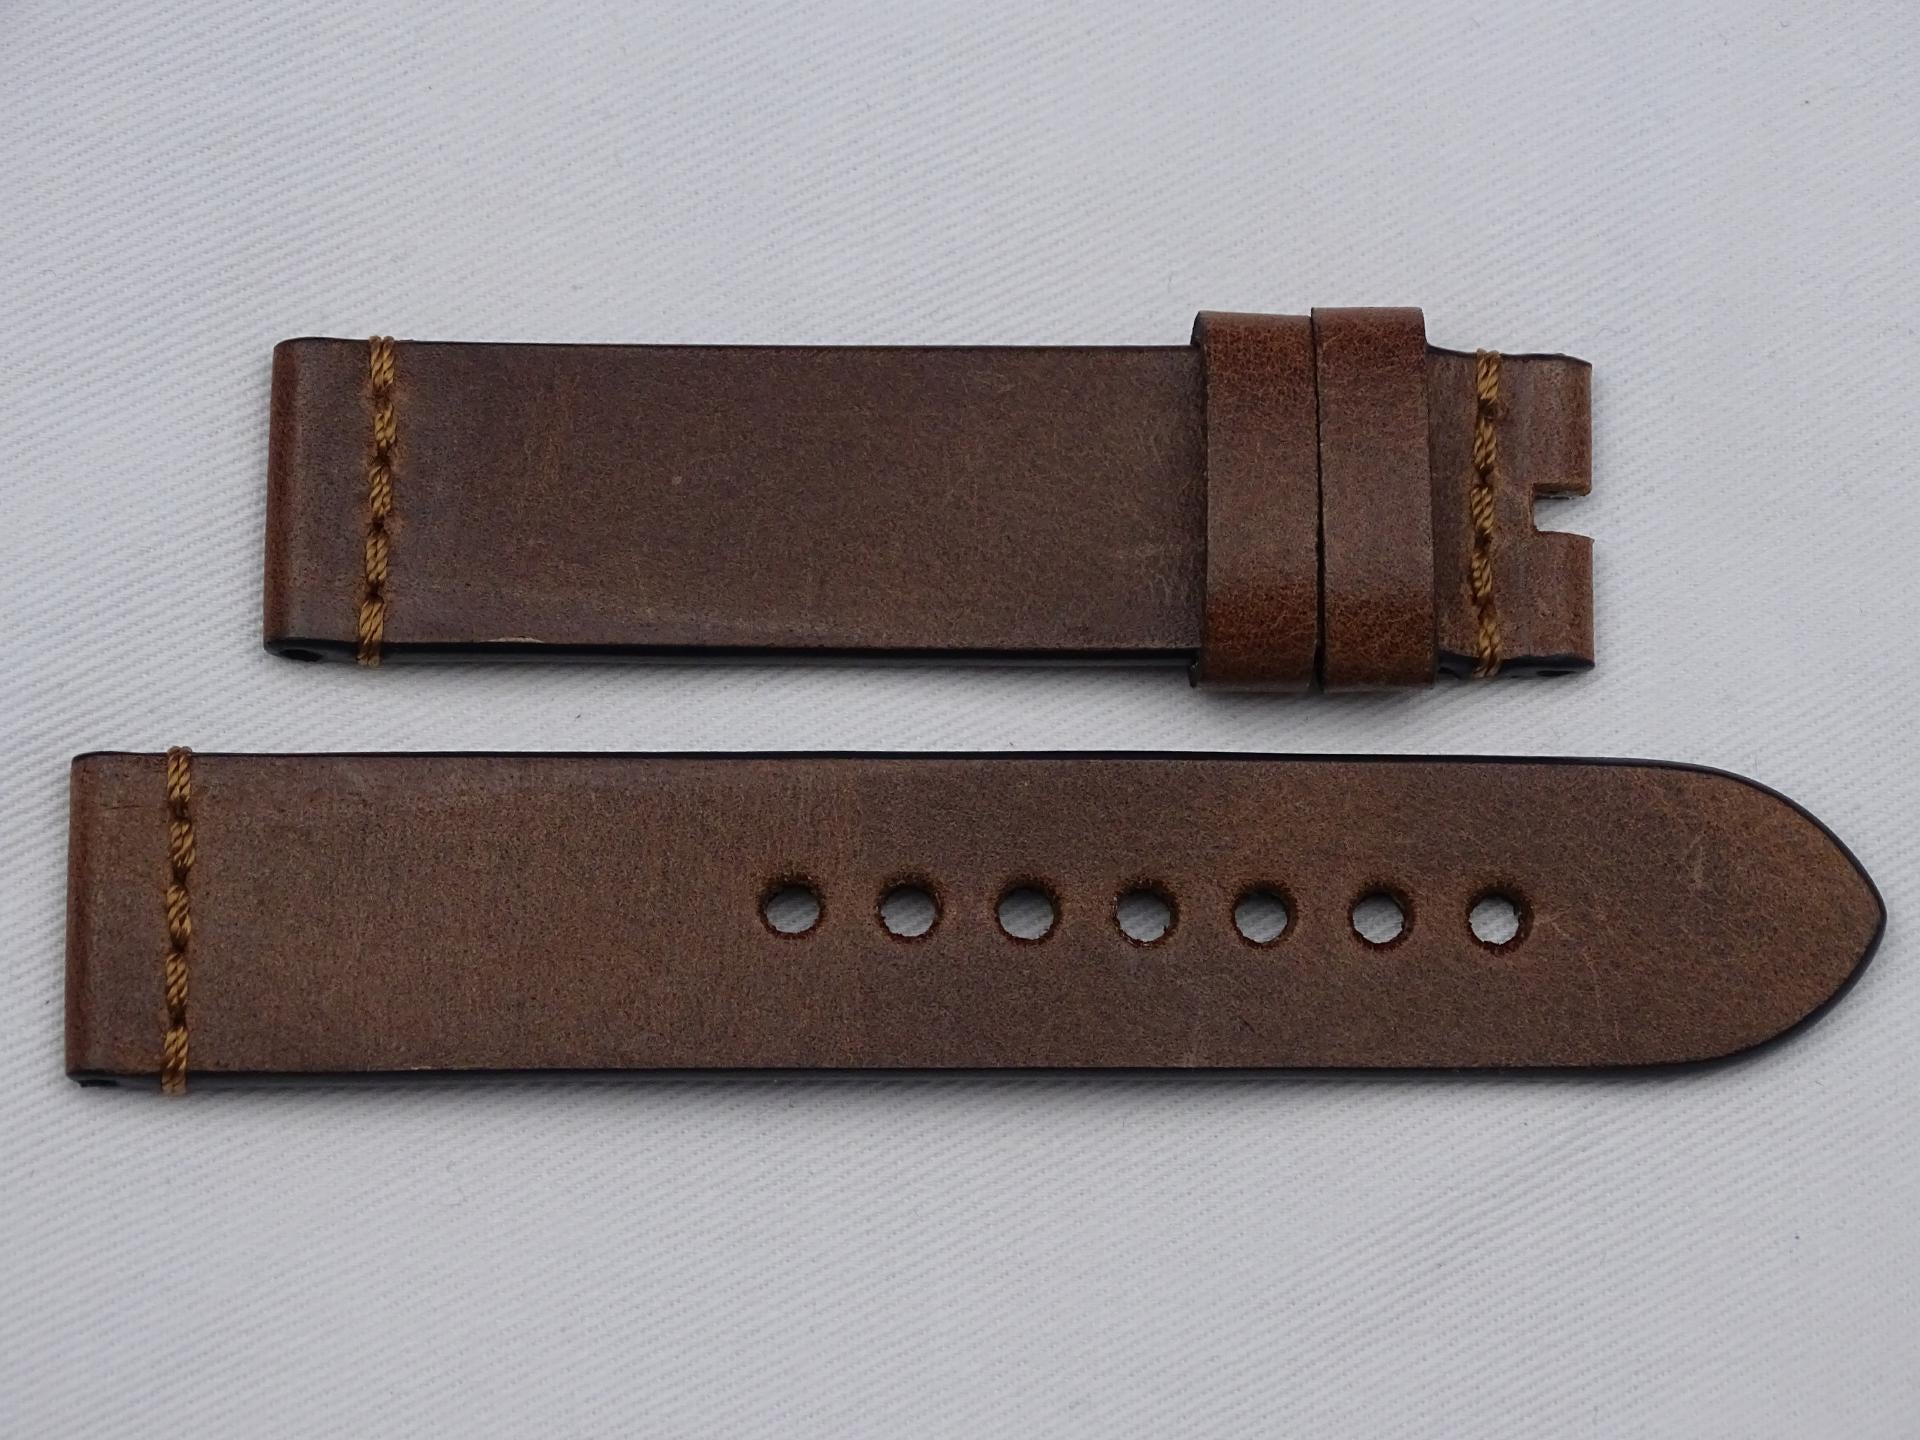 Leather Strap brown with bonce stitching